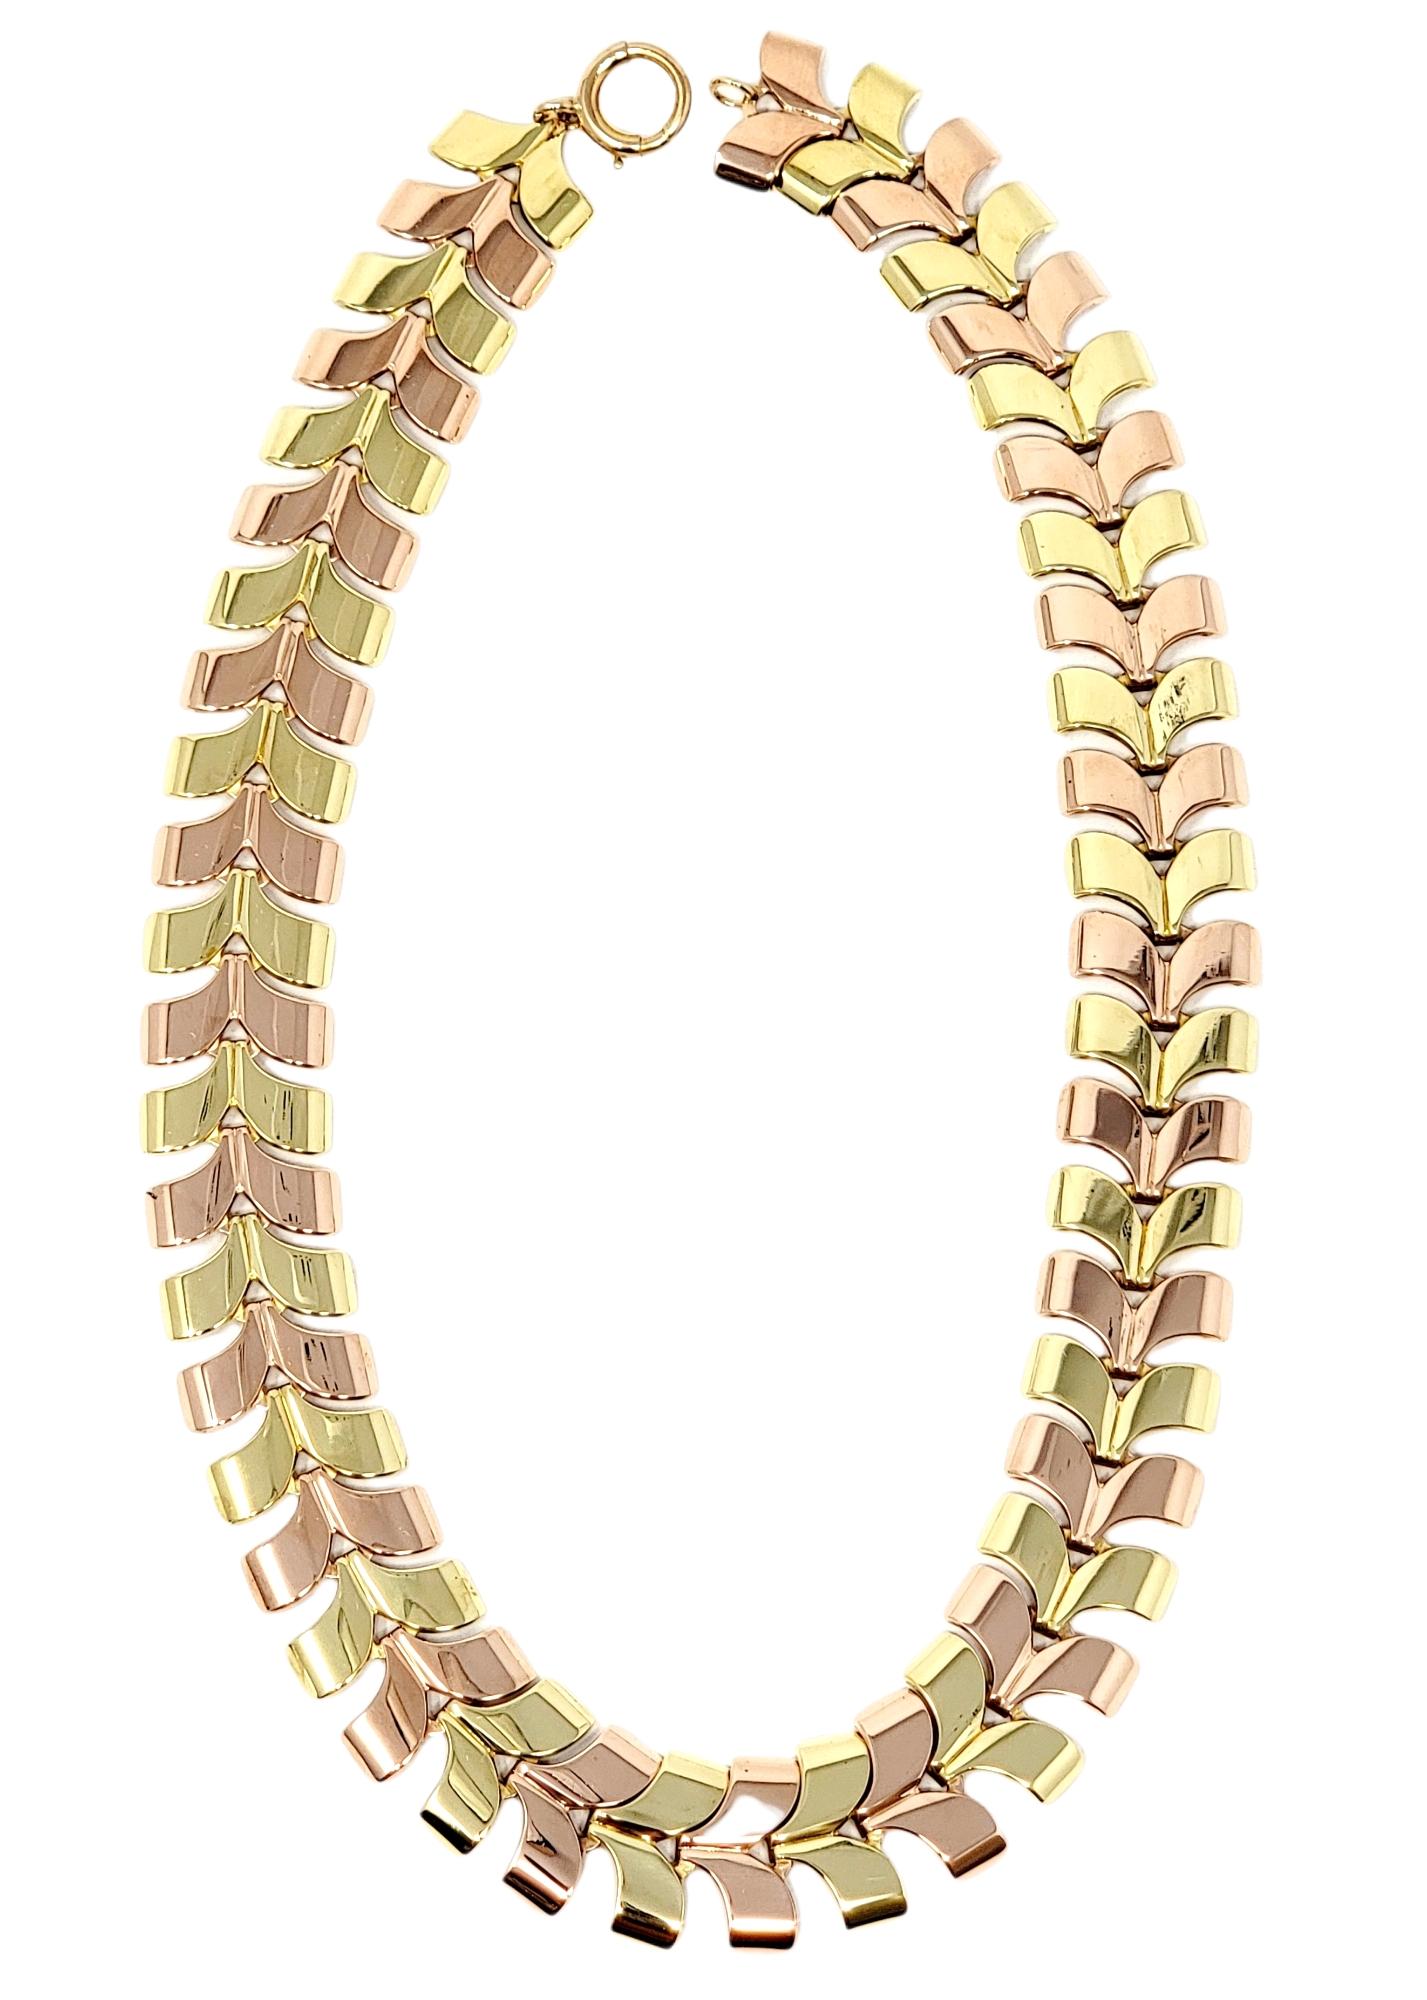 Modern and sleek two-toned 14 karat yellow and rose gold curved chevron style necklace. This versatile piece can be dressed up or down and worn with just about everything. The subtle alternating color pattern gives this simple necklace a little